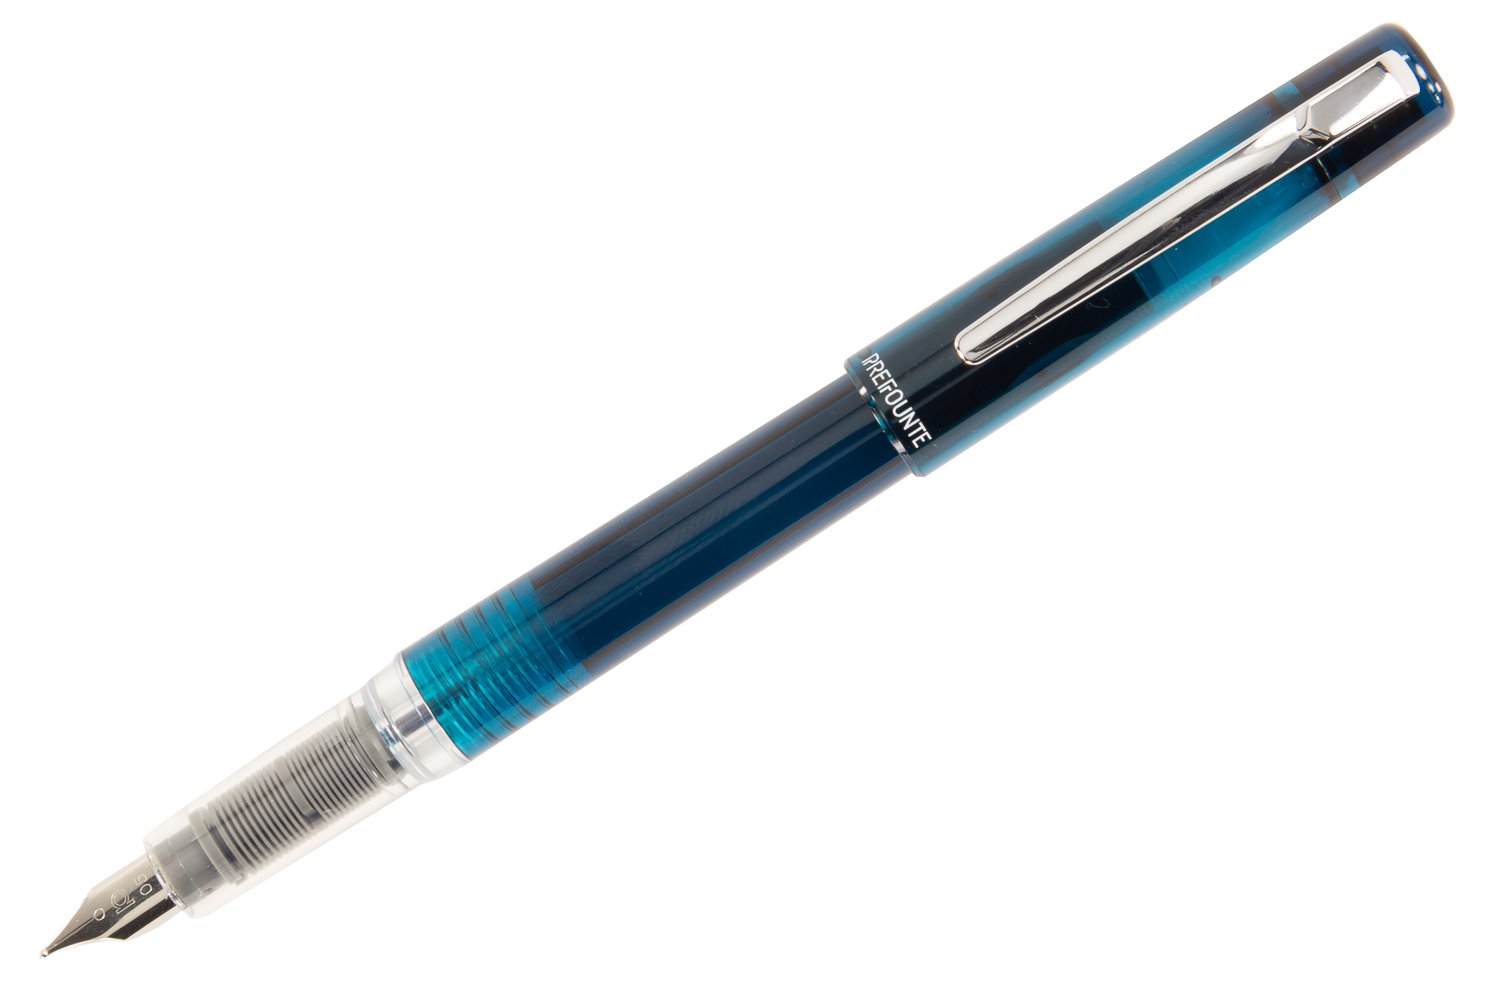 Top 10 Fountain Pens for Newbies - The Goulet Pen Company